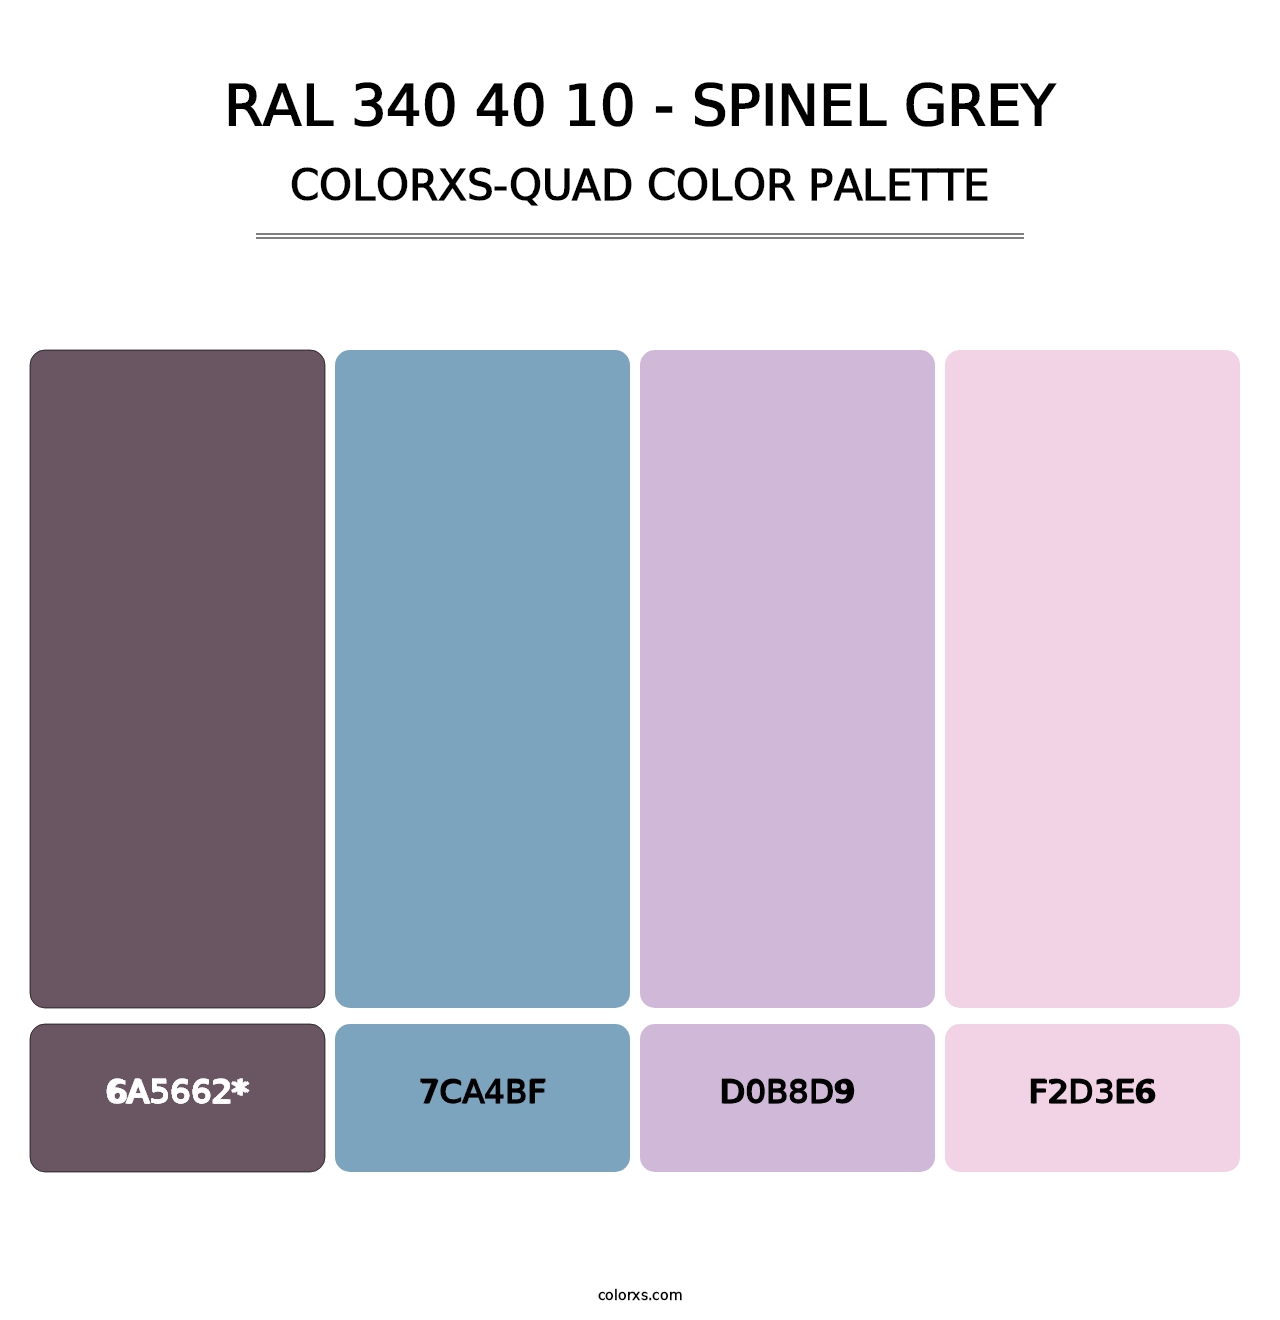 RAL 340 40 10 - Spinel Grey - Colorxs Quad Palette